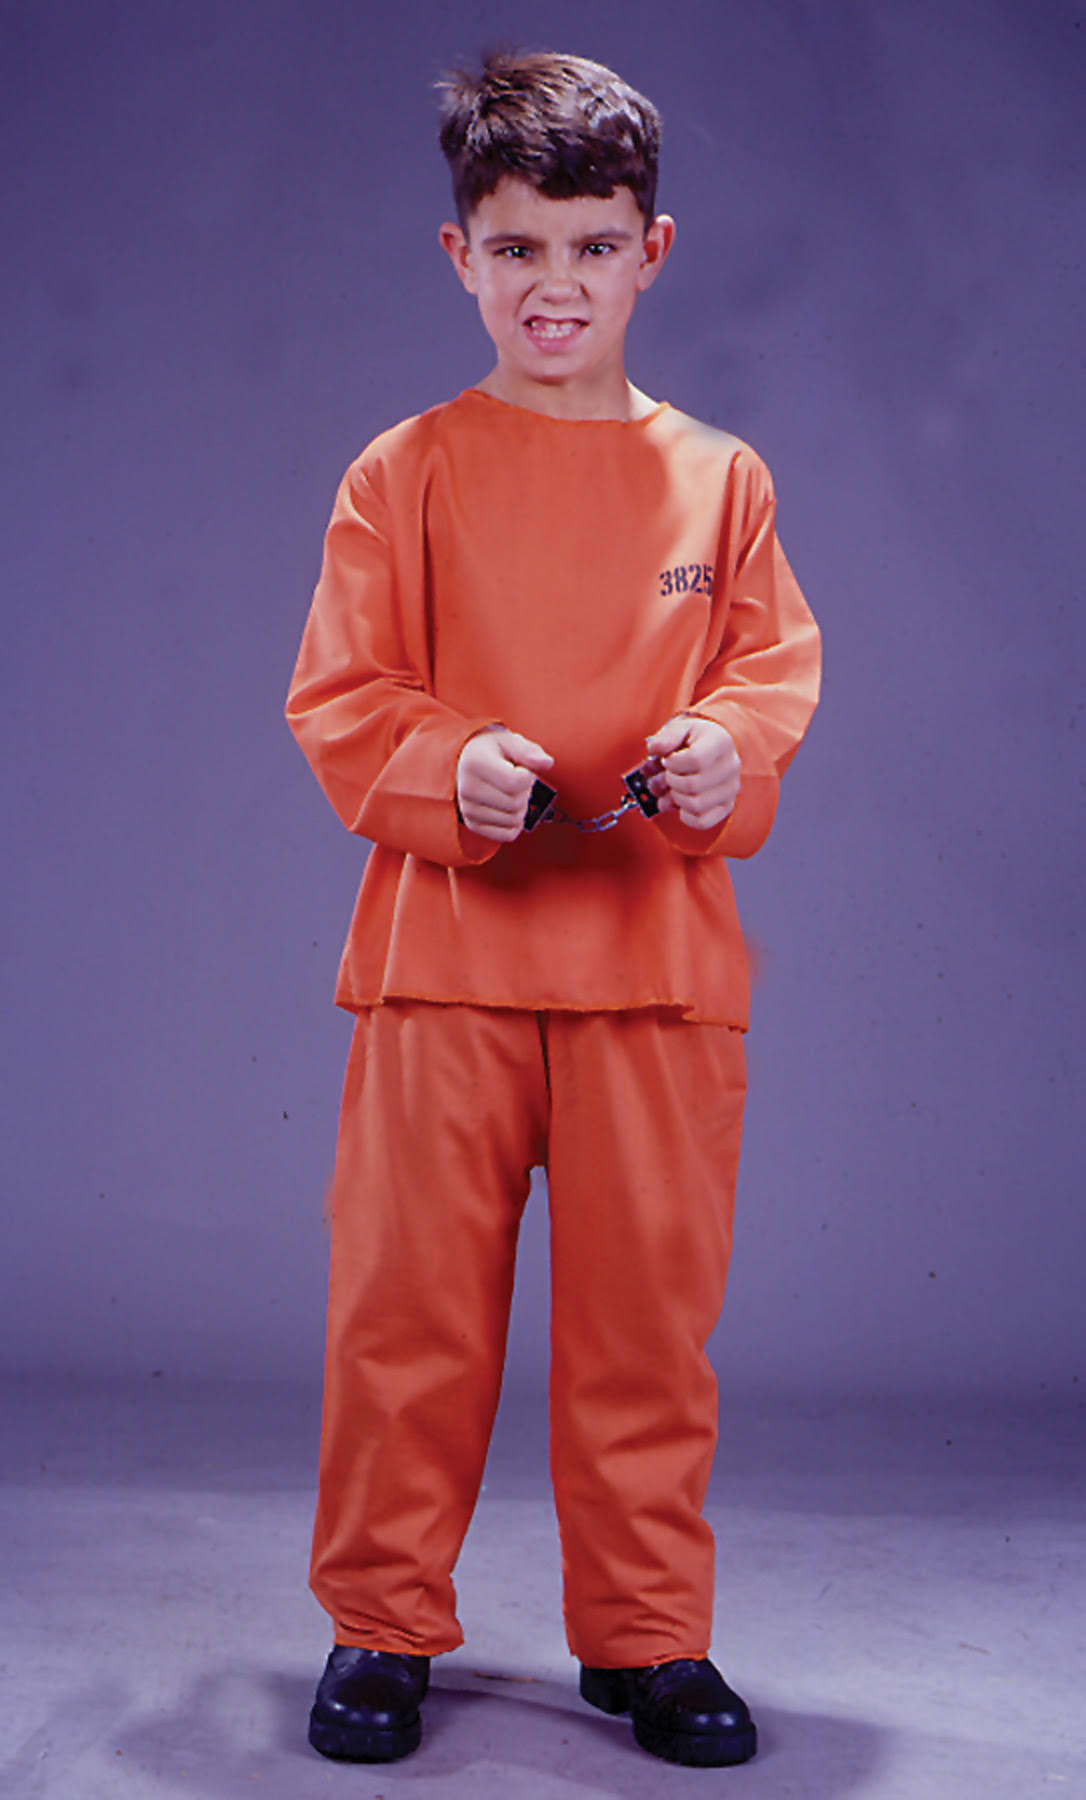 Got Busted Costume - Child Costume - Small (4-6)